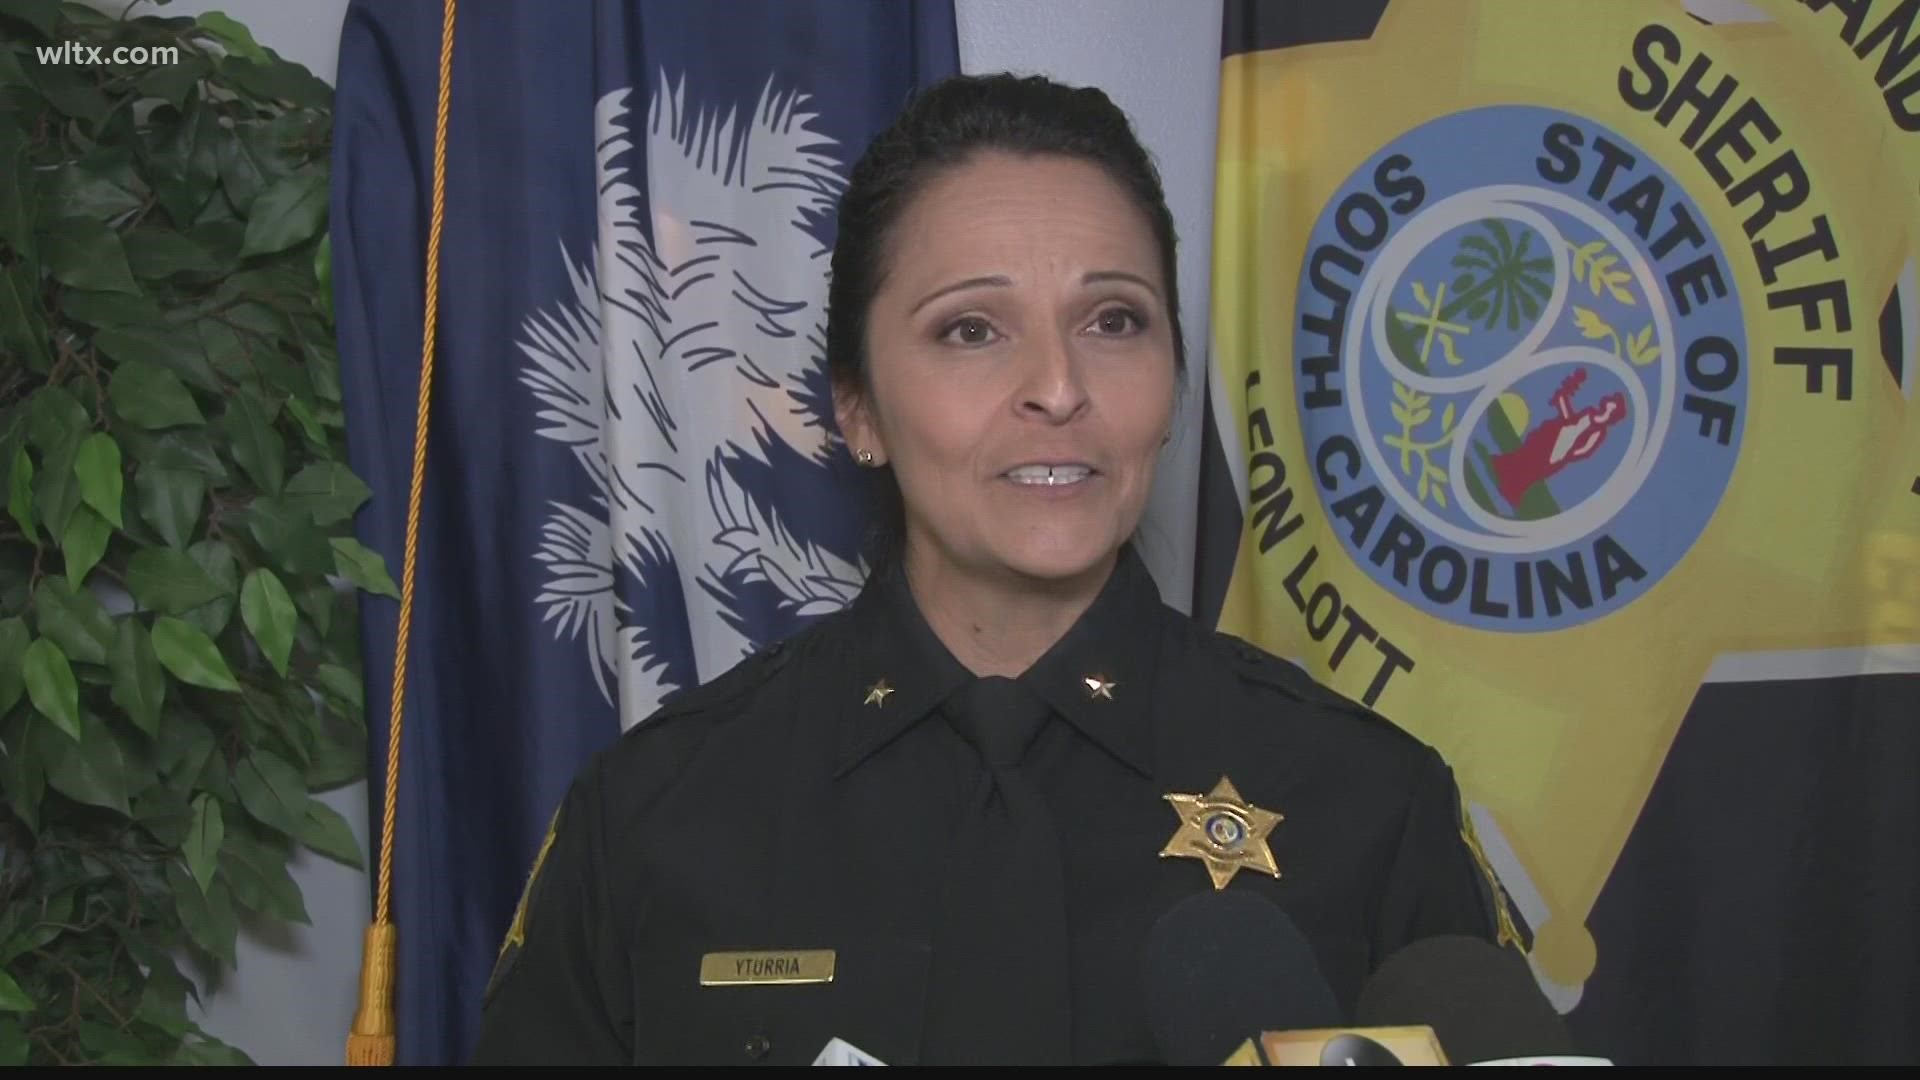 A new promotion has made Deputy Chief Maria Yturria the highest-ranking Hispanic officer in the history of the Richland County Sheriff's Department.